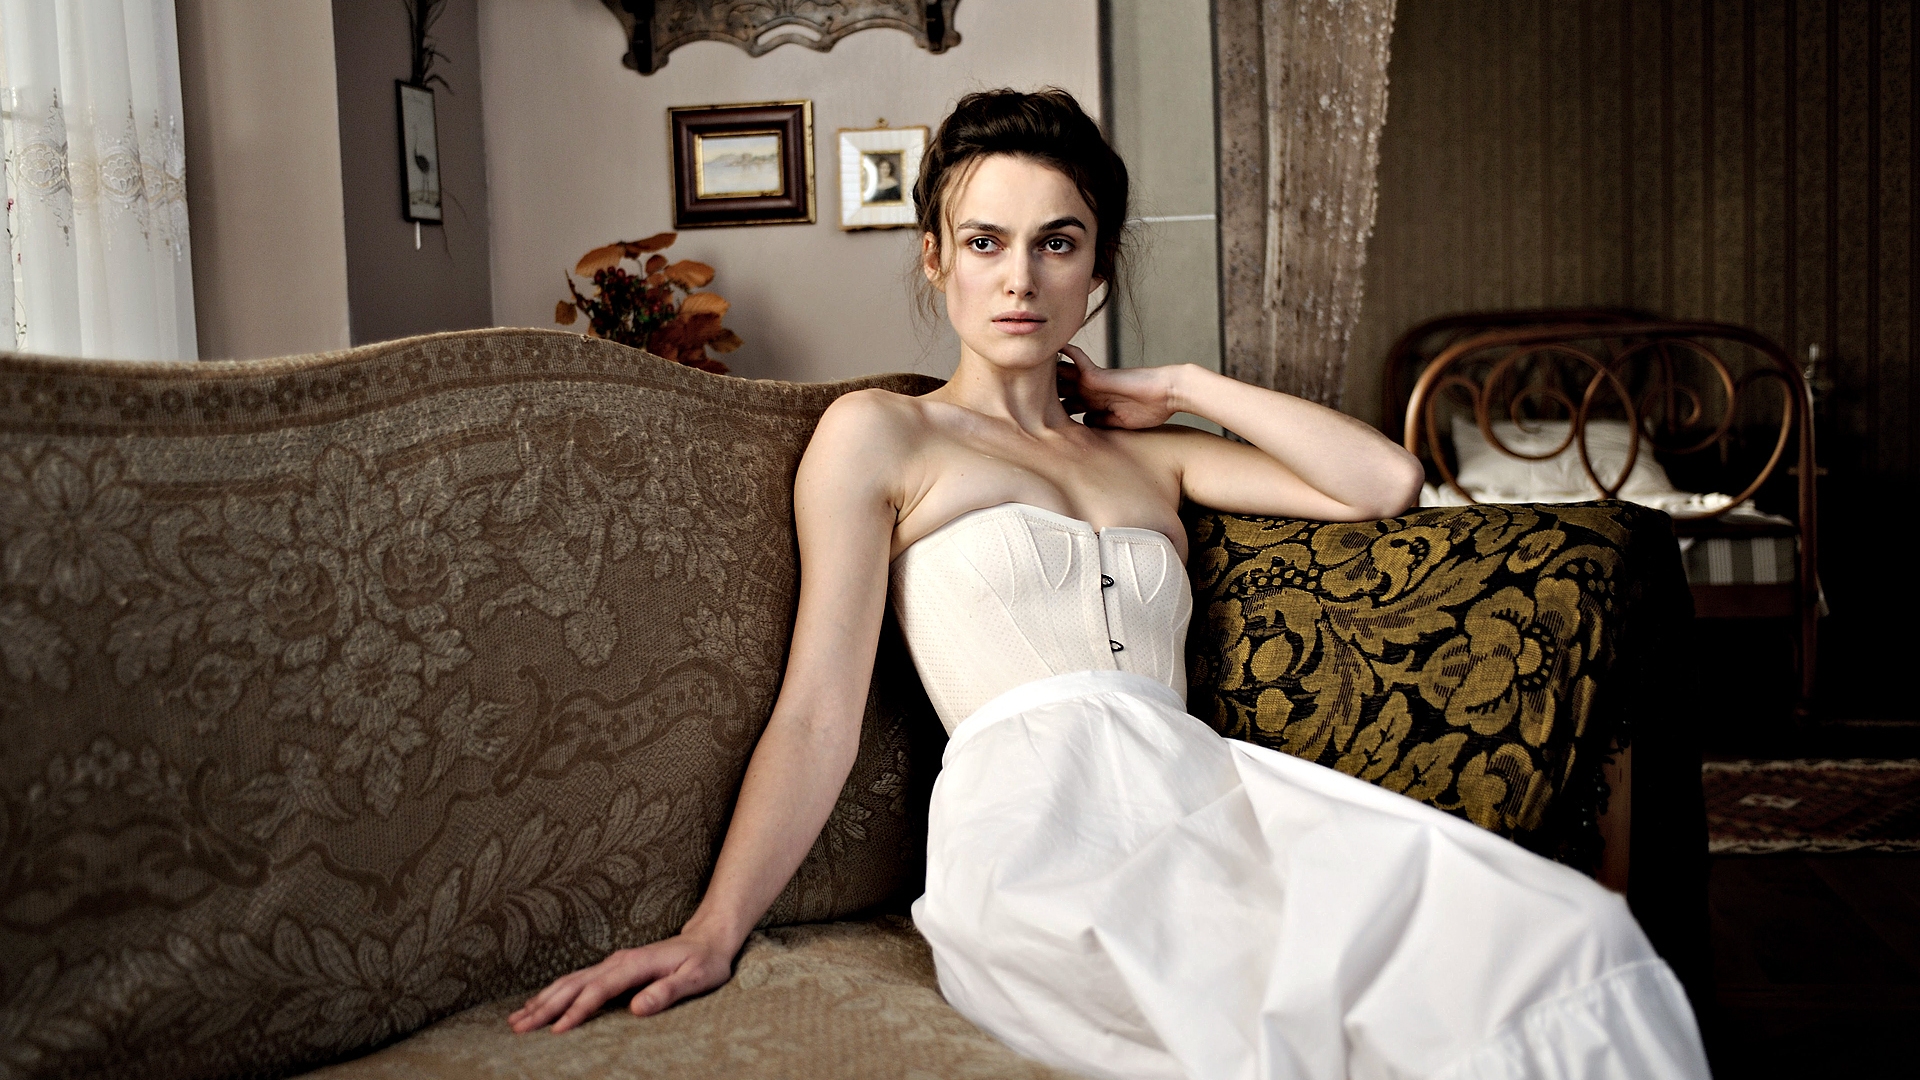 Keira Knightley A Dangerous Method for 1920 x 1080 HDTV 1080p resolution